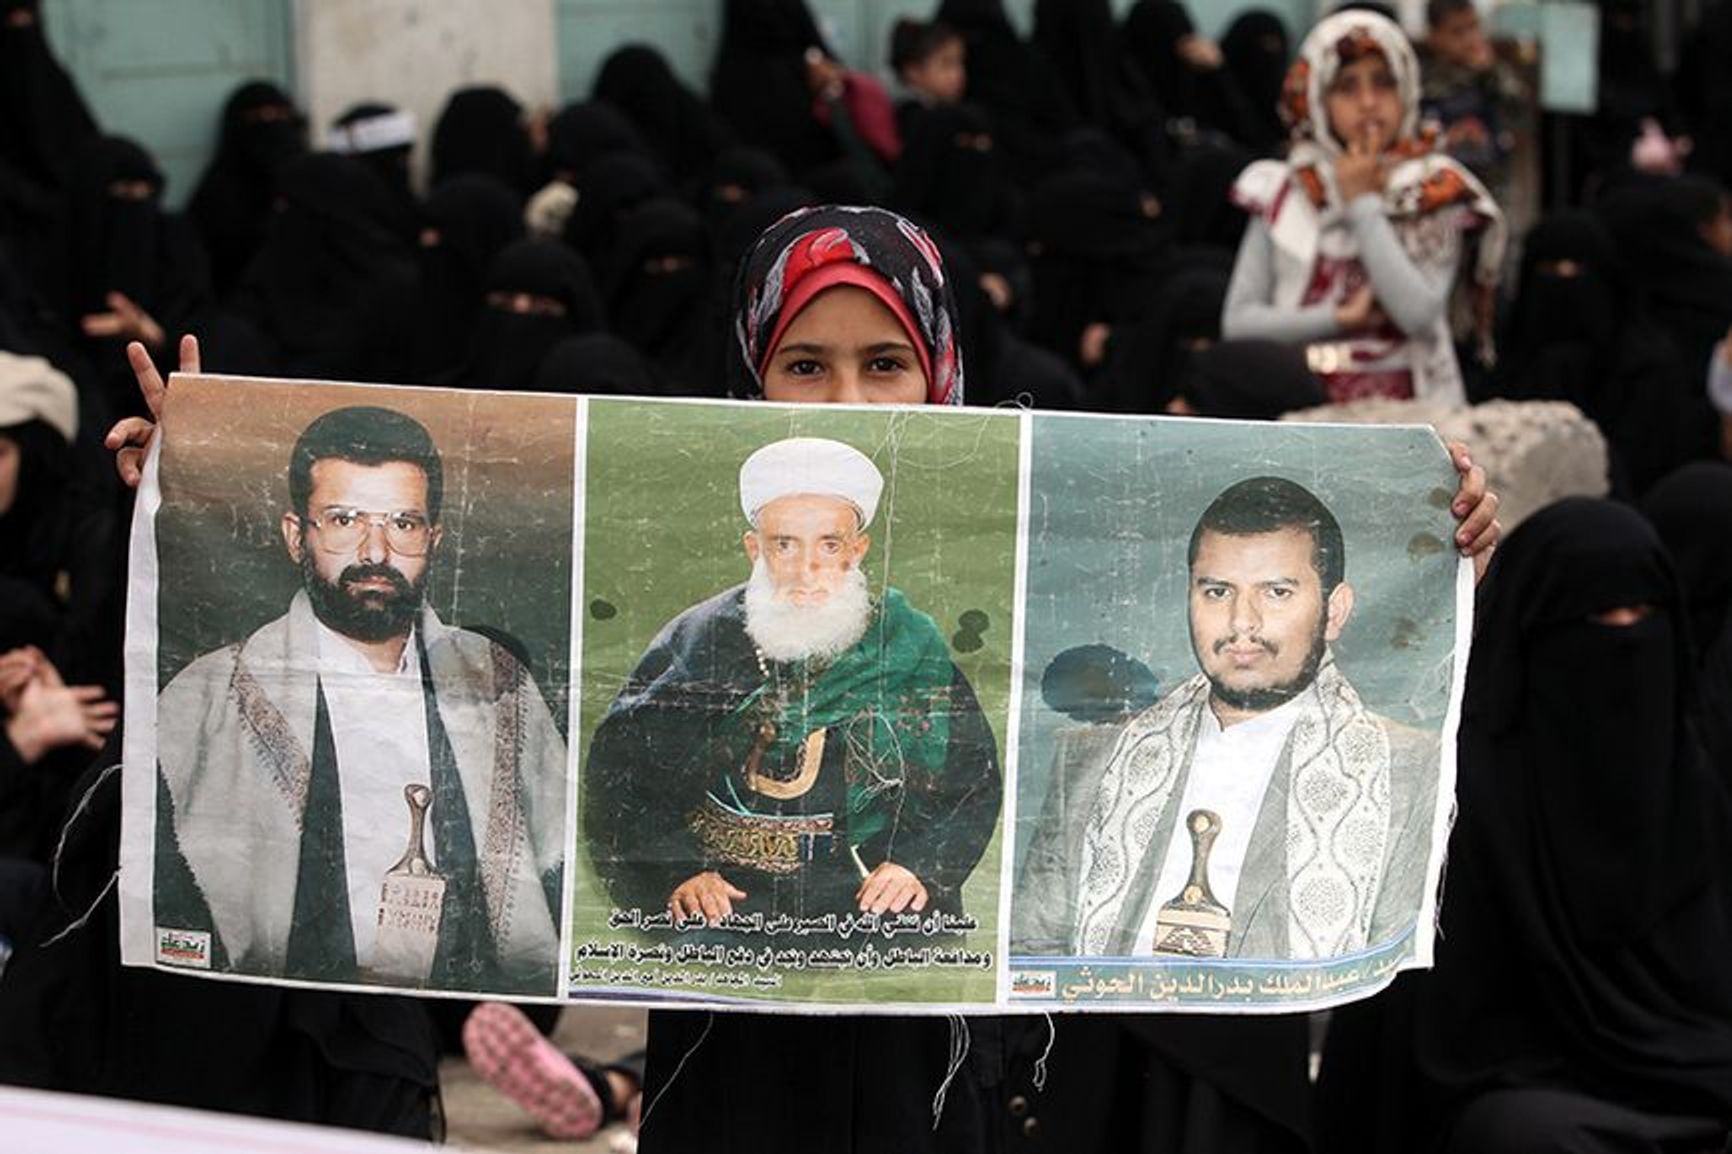 The poster shows Hussein al-Houthi (left), Abdul-Malik al-Houthi (right) and their father Badreddin al-Houthi (center)